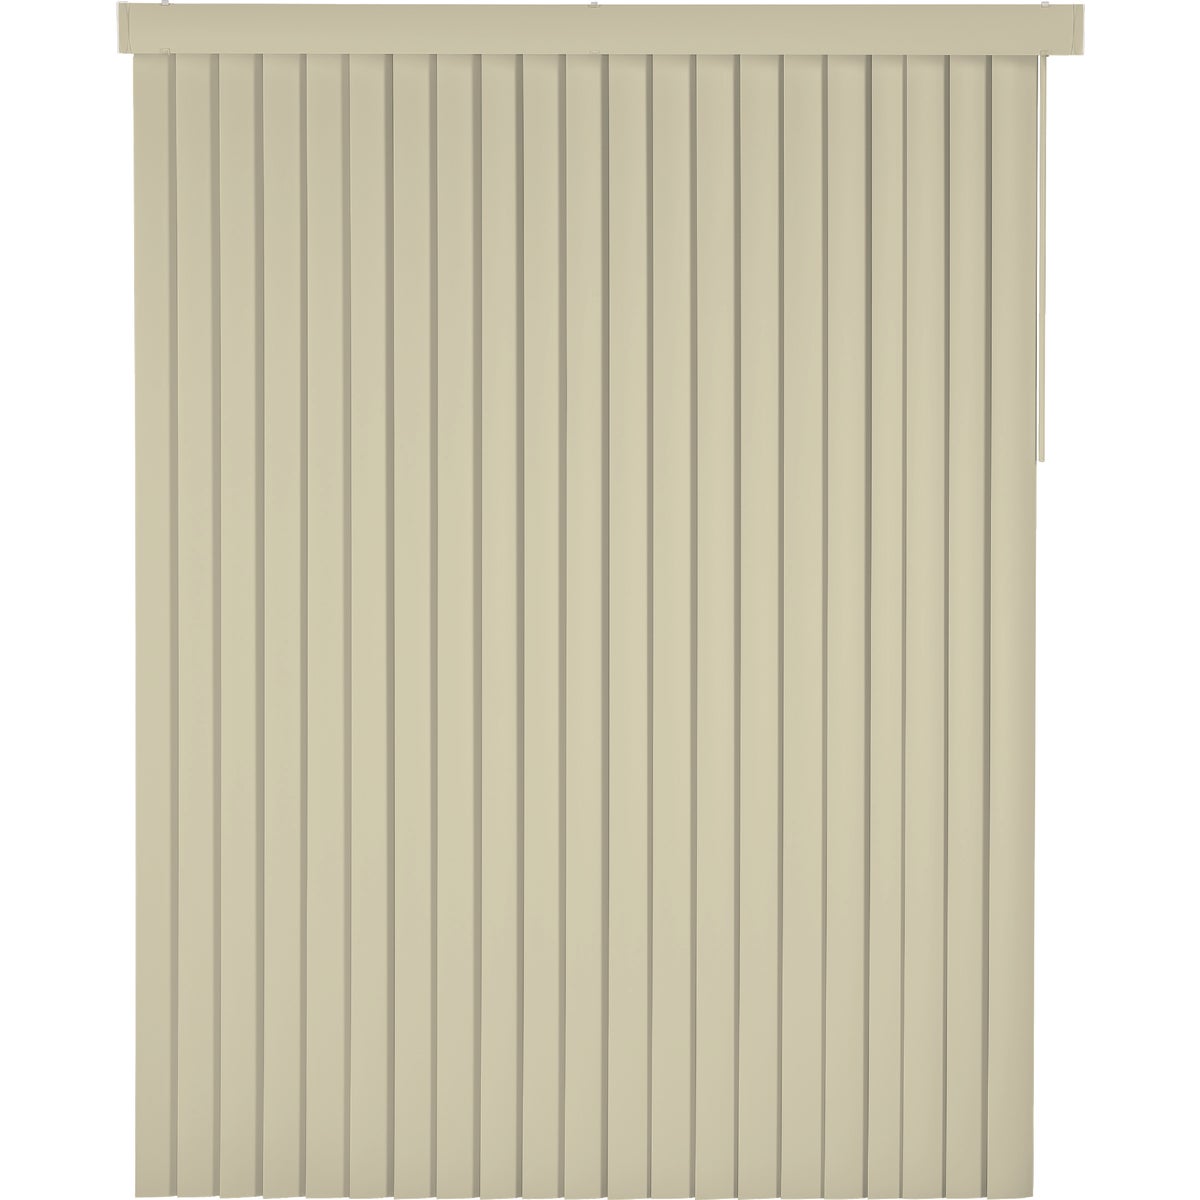 Item 603569, Room darkening louvers provides light control while creating privacy.